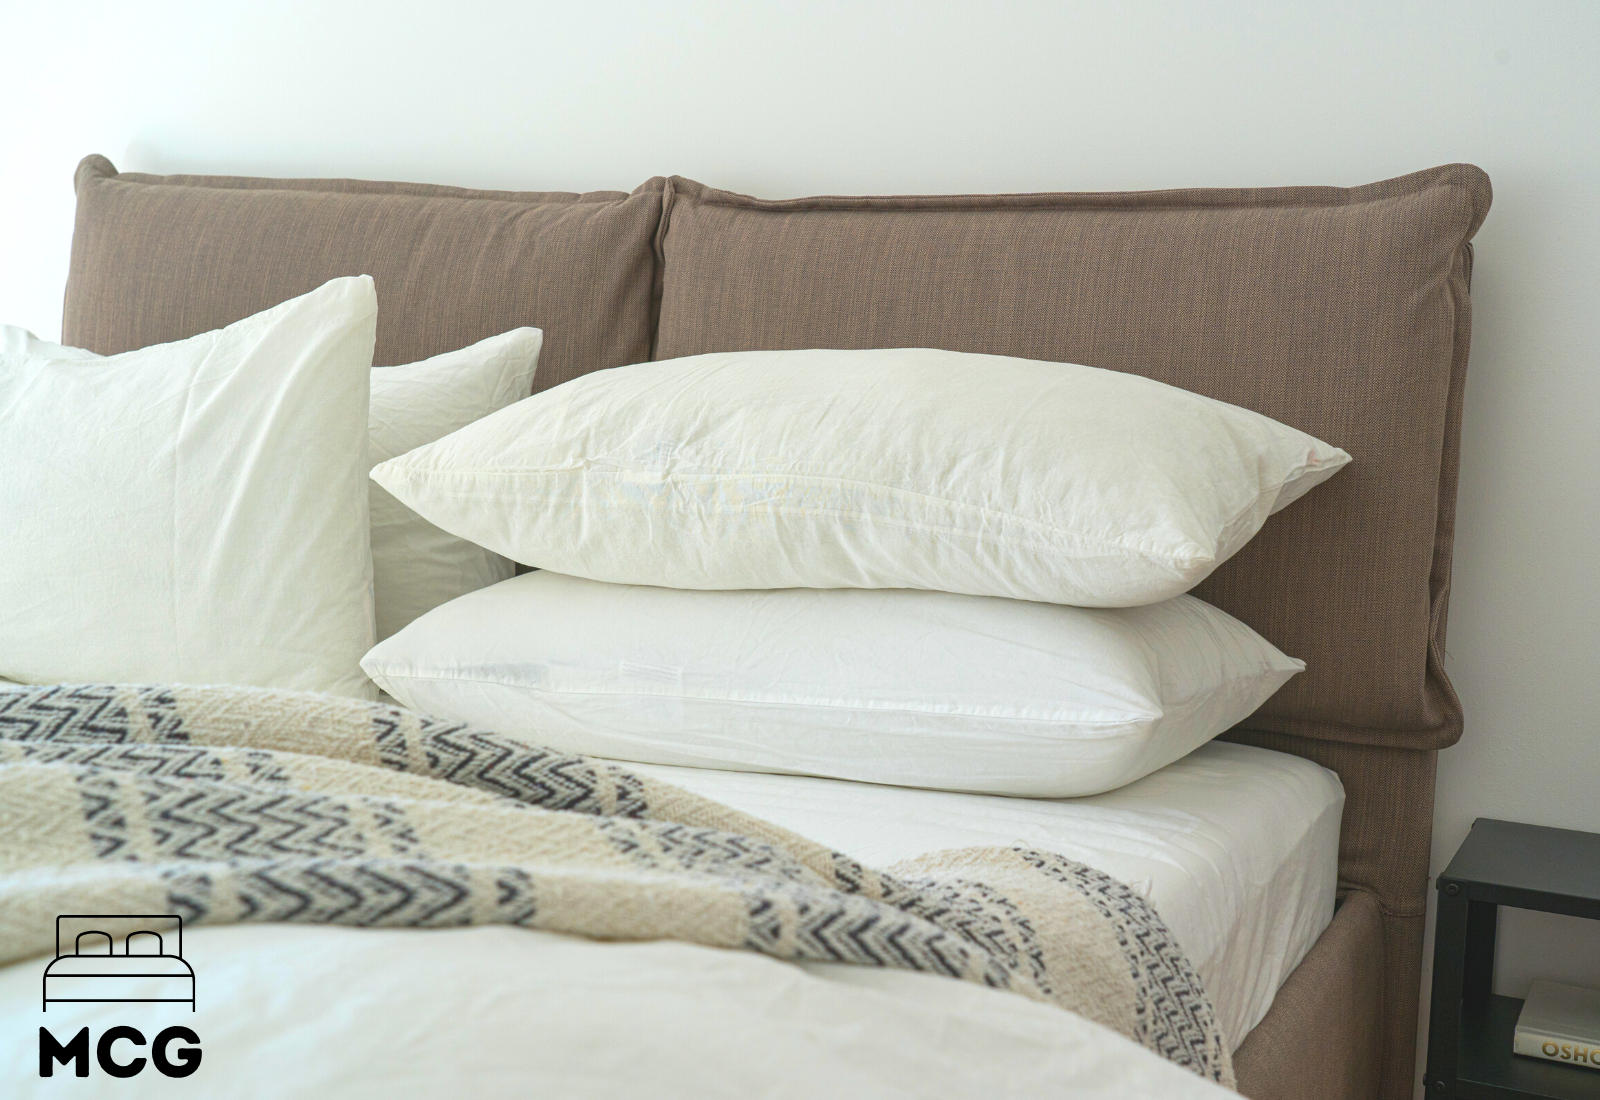 stack of down pillows on a bed